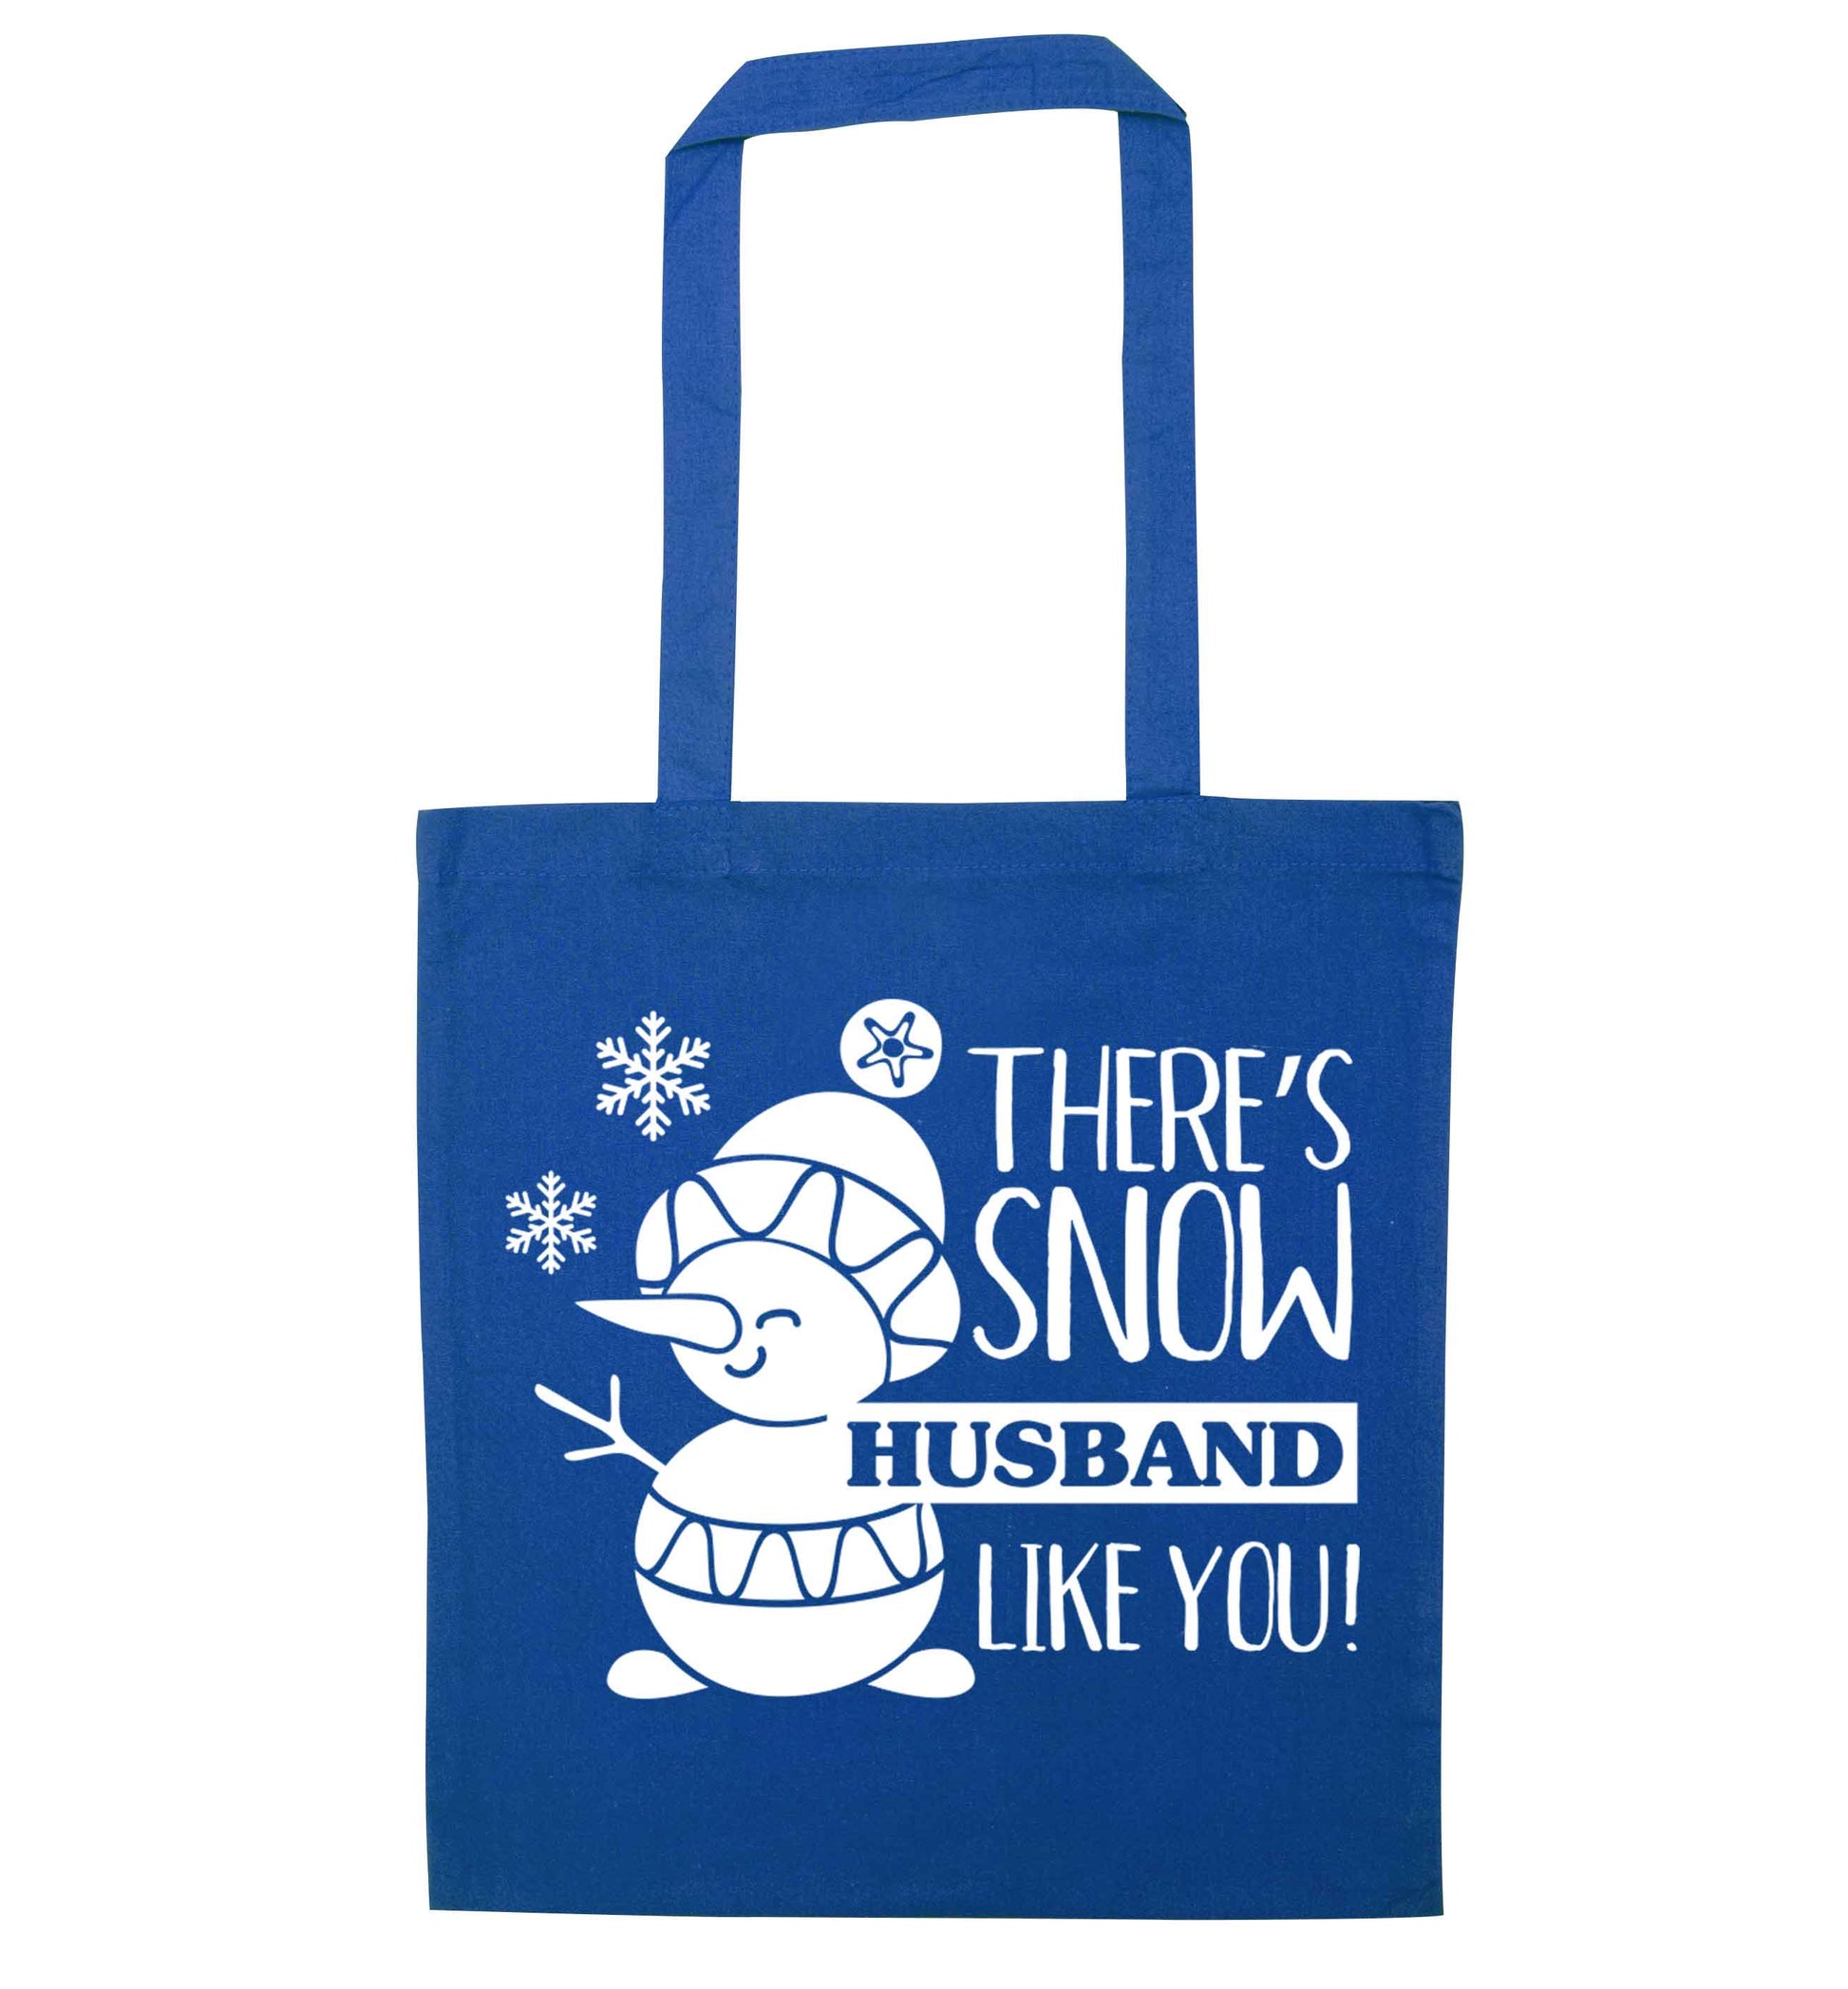 There's snow husband like you blue tote bag